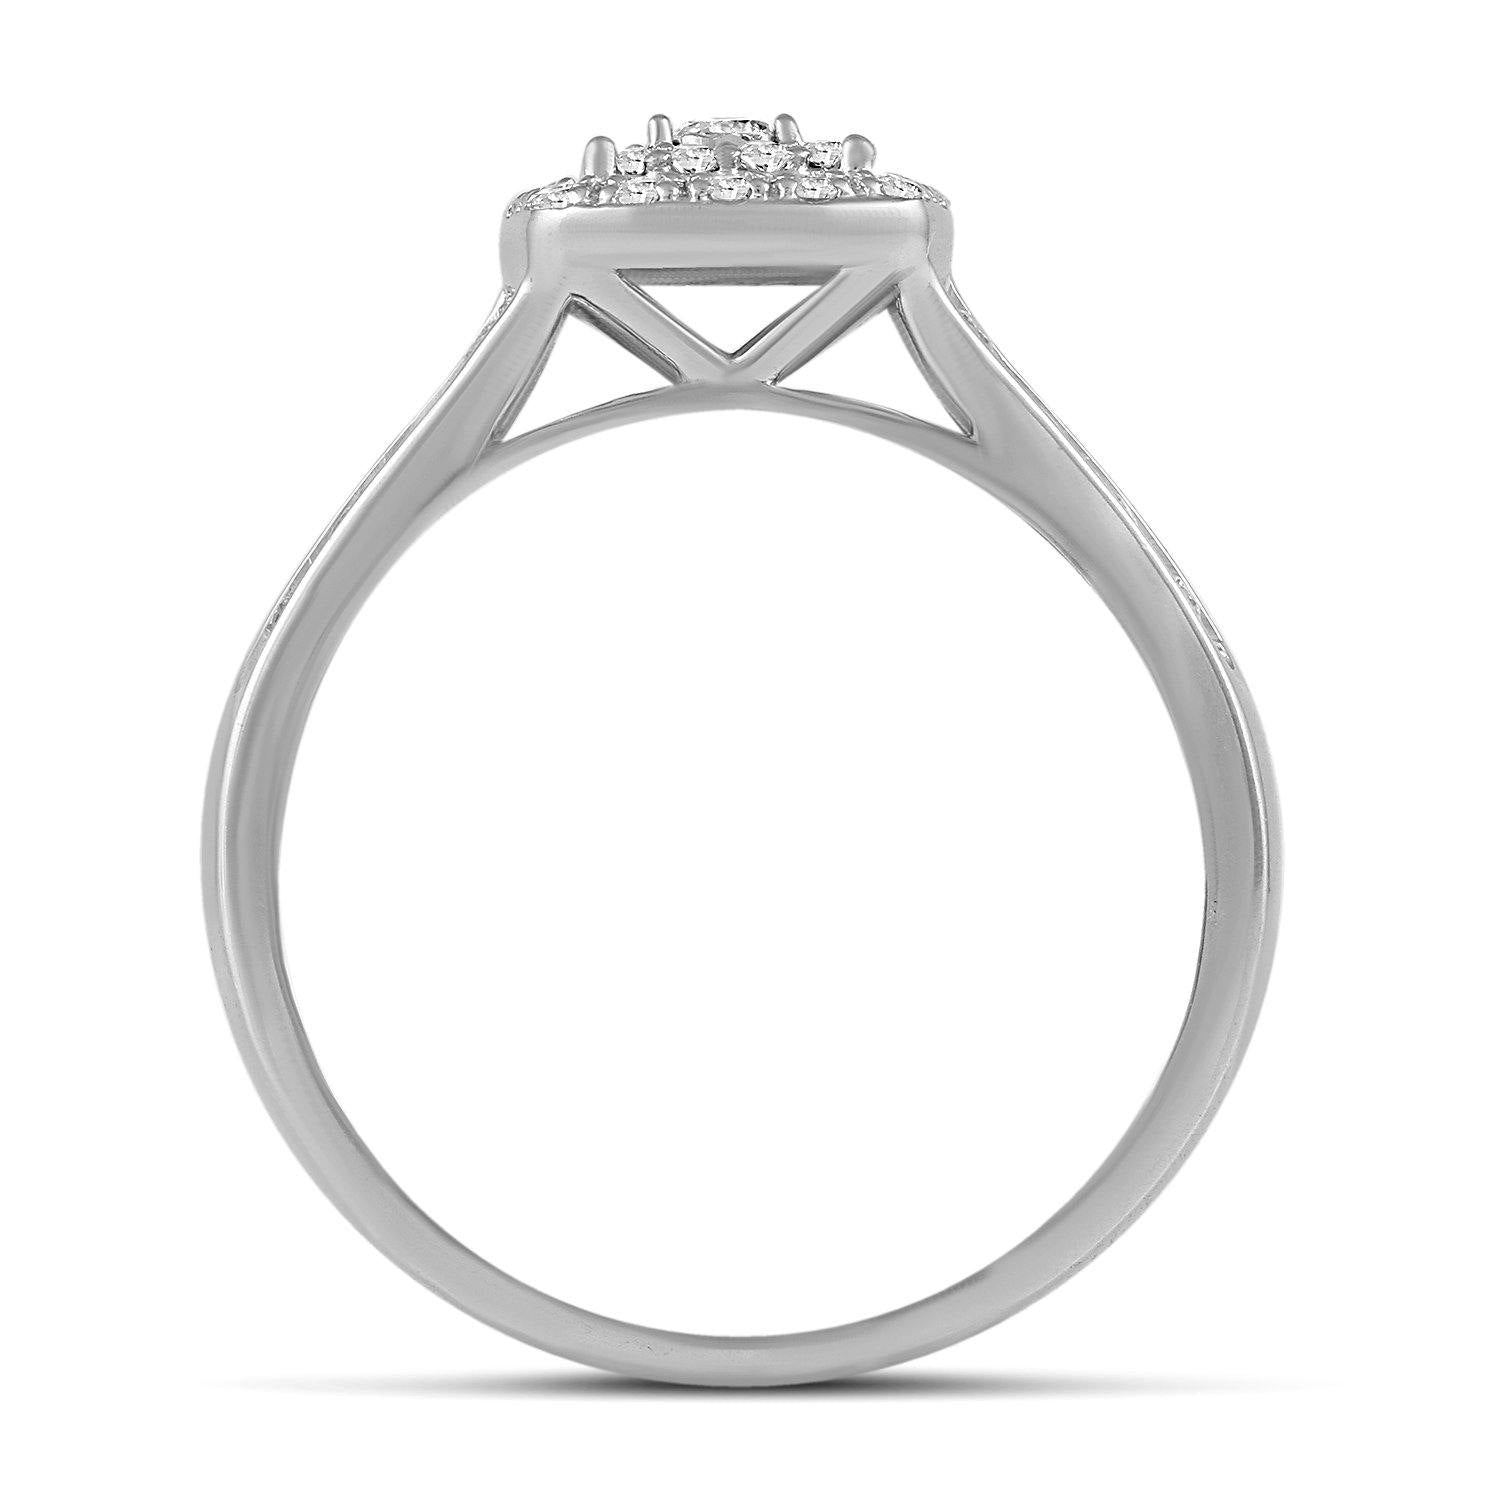 1/3CT TW Diamond Engagement Ring from Trio Set in 10KT White Gold - Fifth and Fine